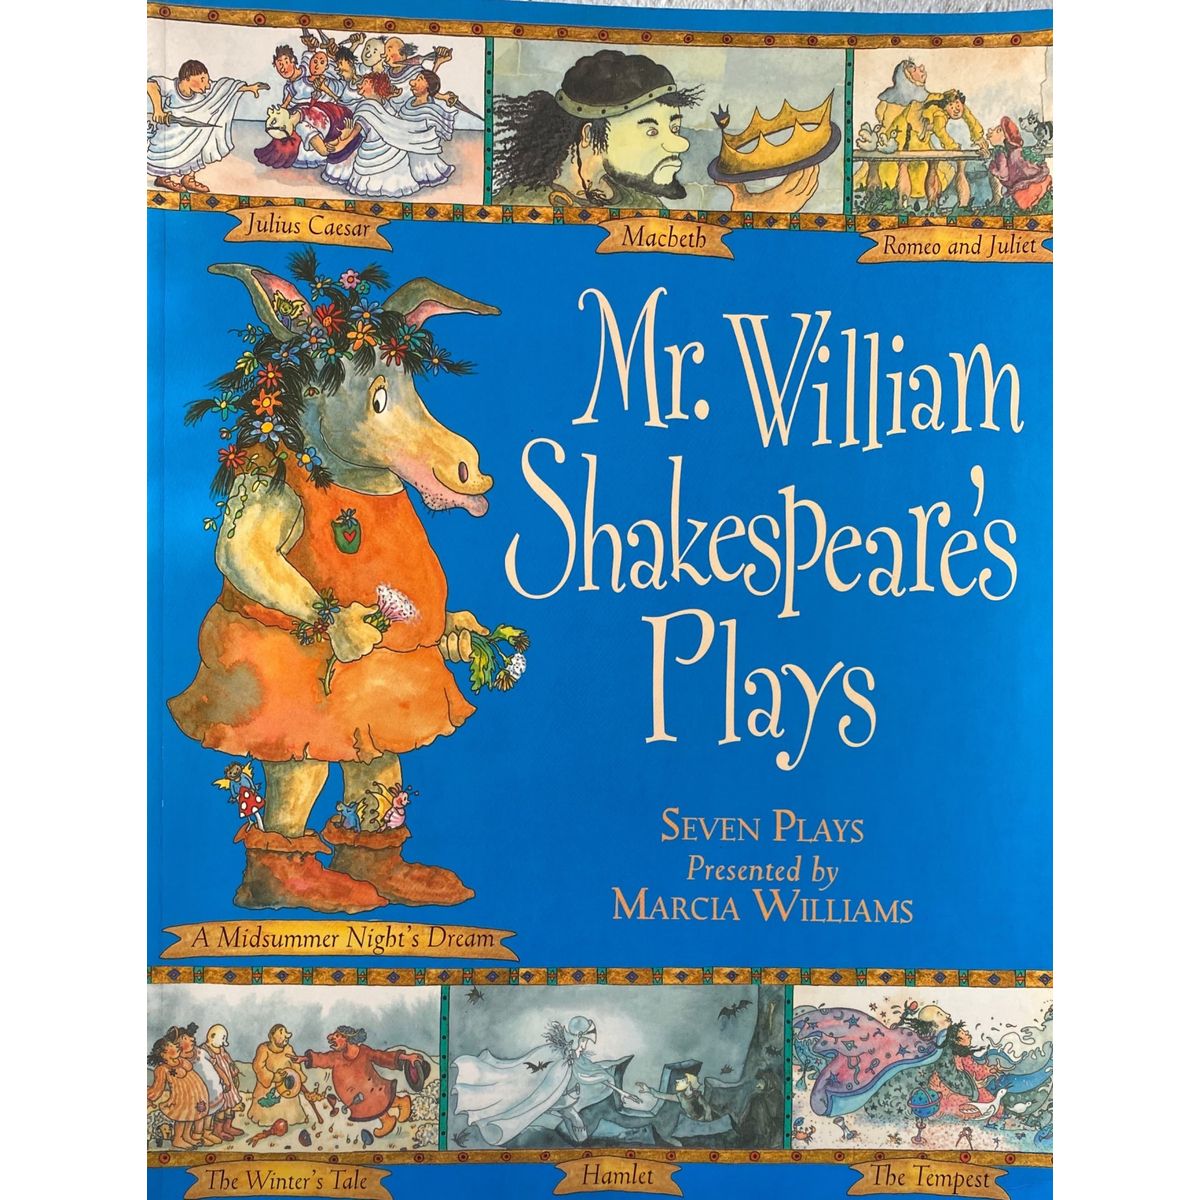 ISBN: 9781406323344 / 1406323349 - Mr. William Shakespeare's Plays by Marcia Williams [2009]